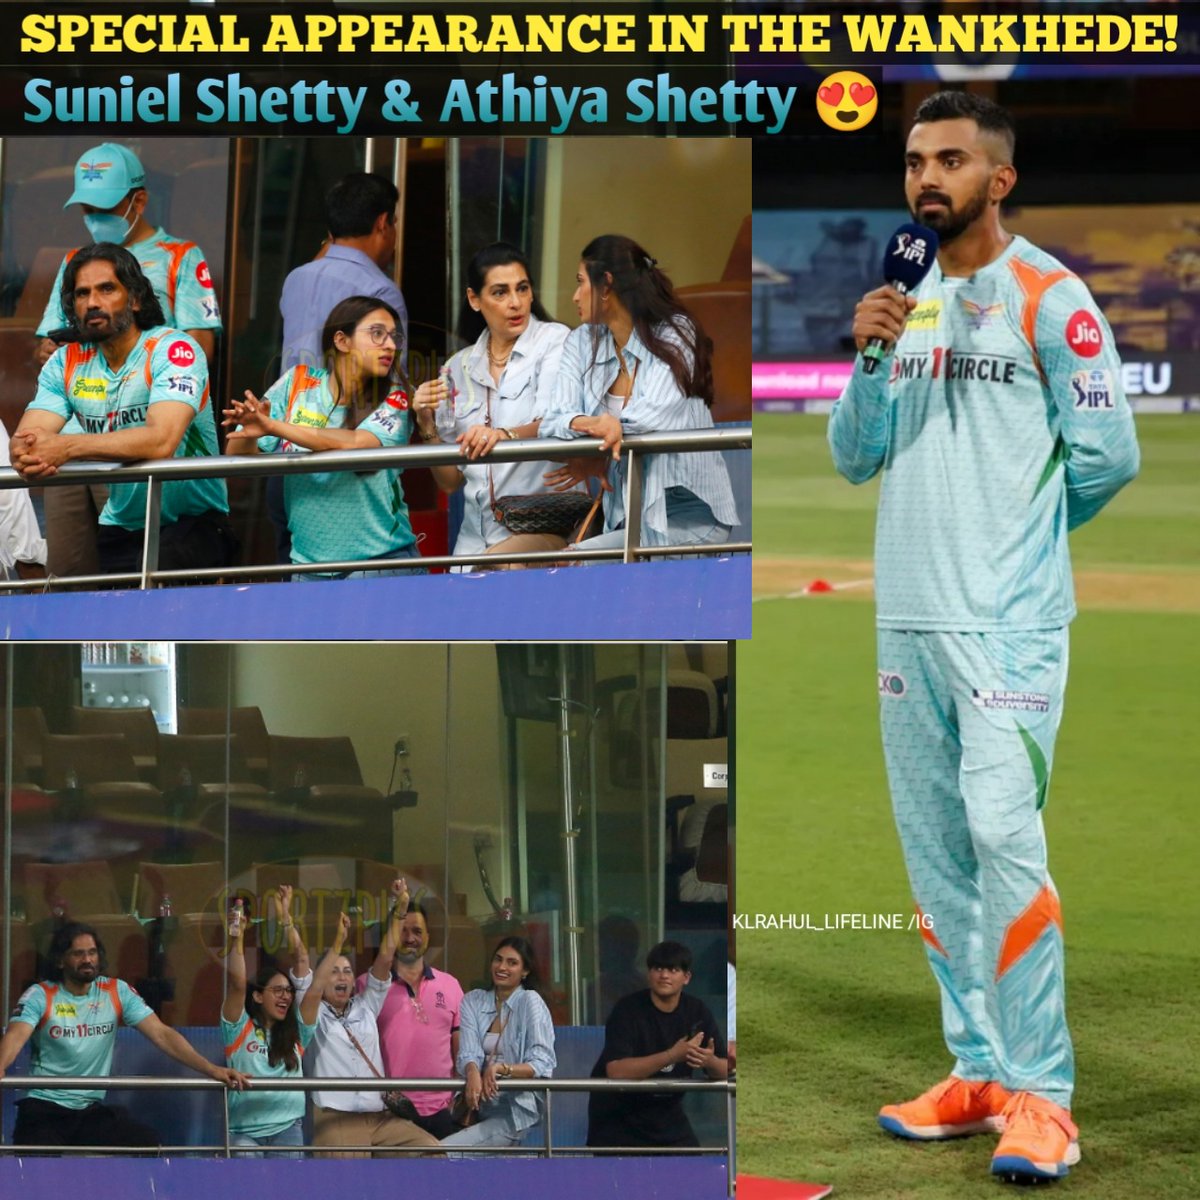 Athiya Shetty and her family is here to cheers for KL Rahul & team! 😍❤️

#KLRahul #IPL #Cricket #LSGvRR #SunielShetty #athiyashetty #AyushBadoni #LucknowSuperGiants